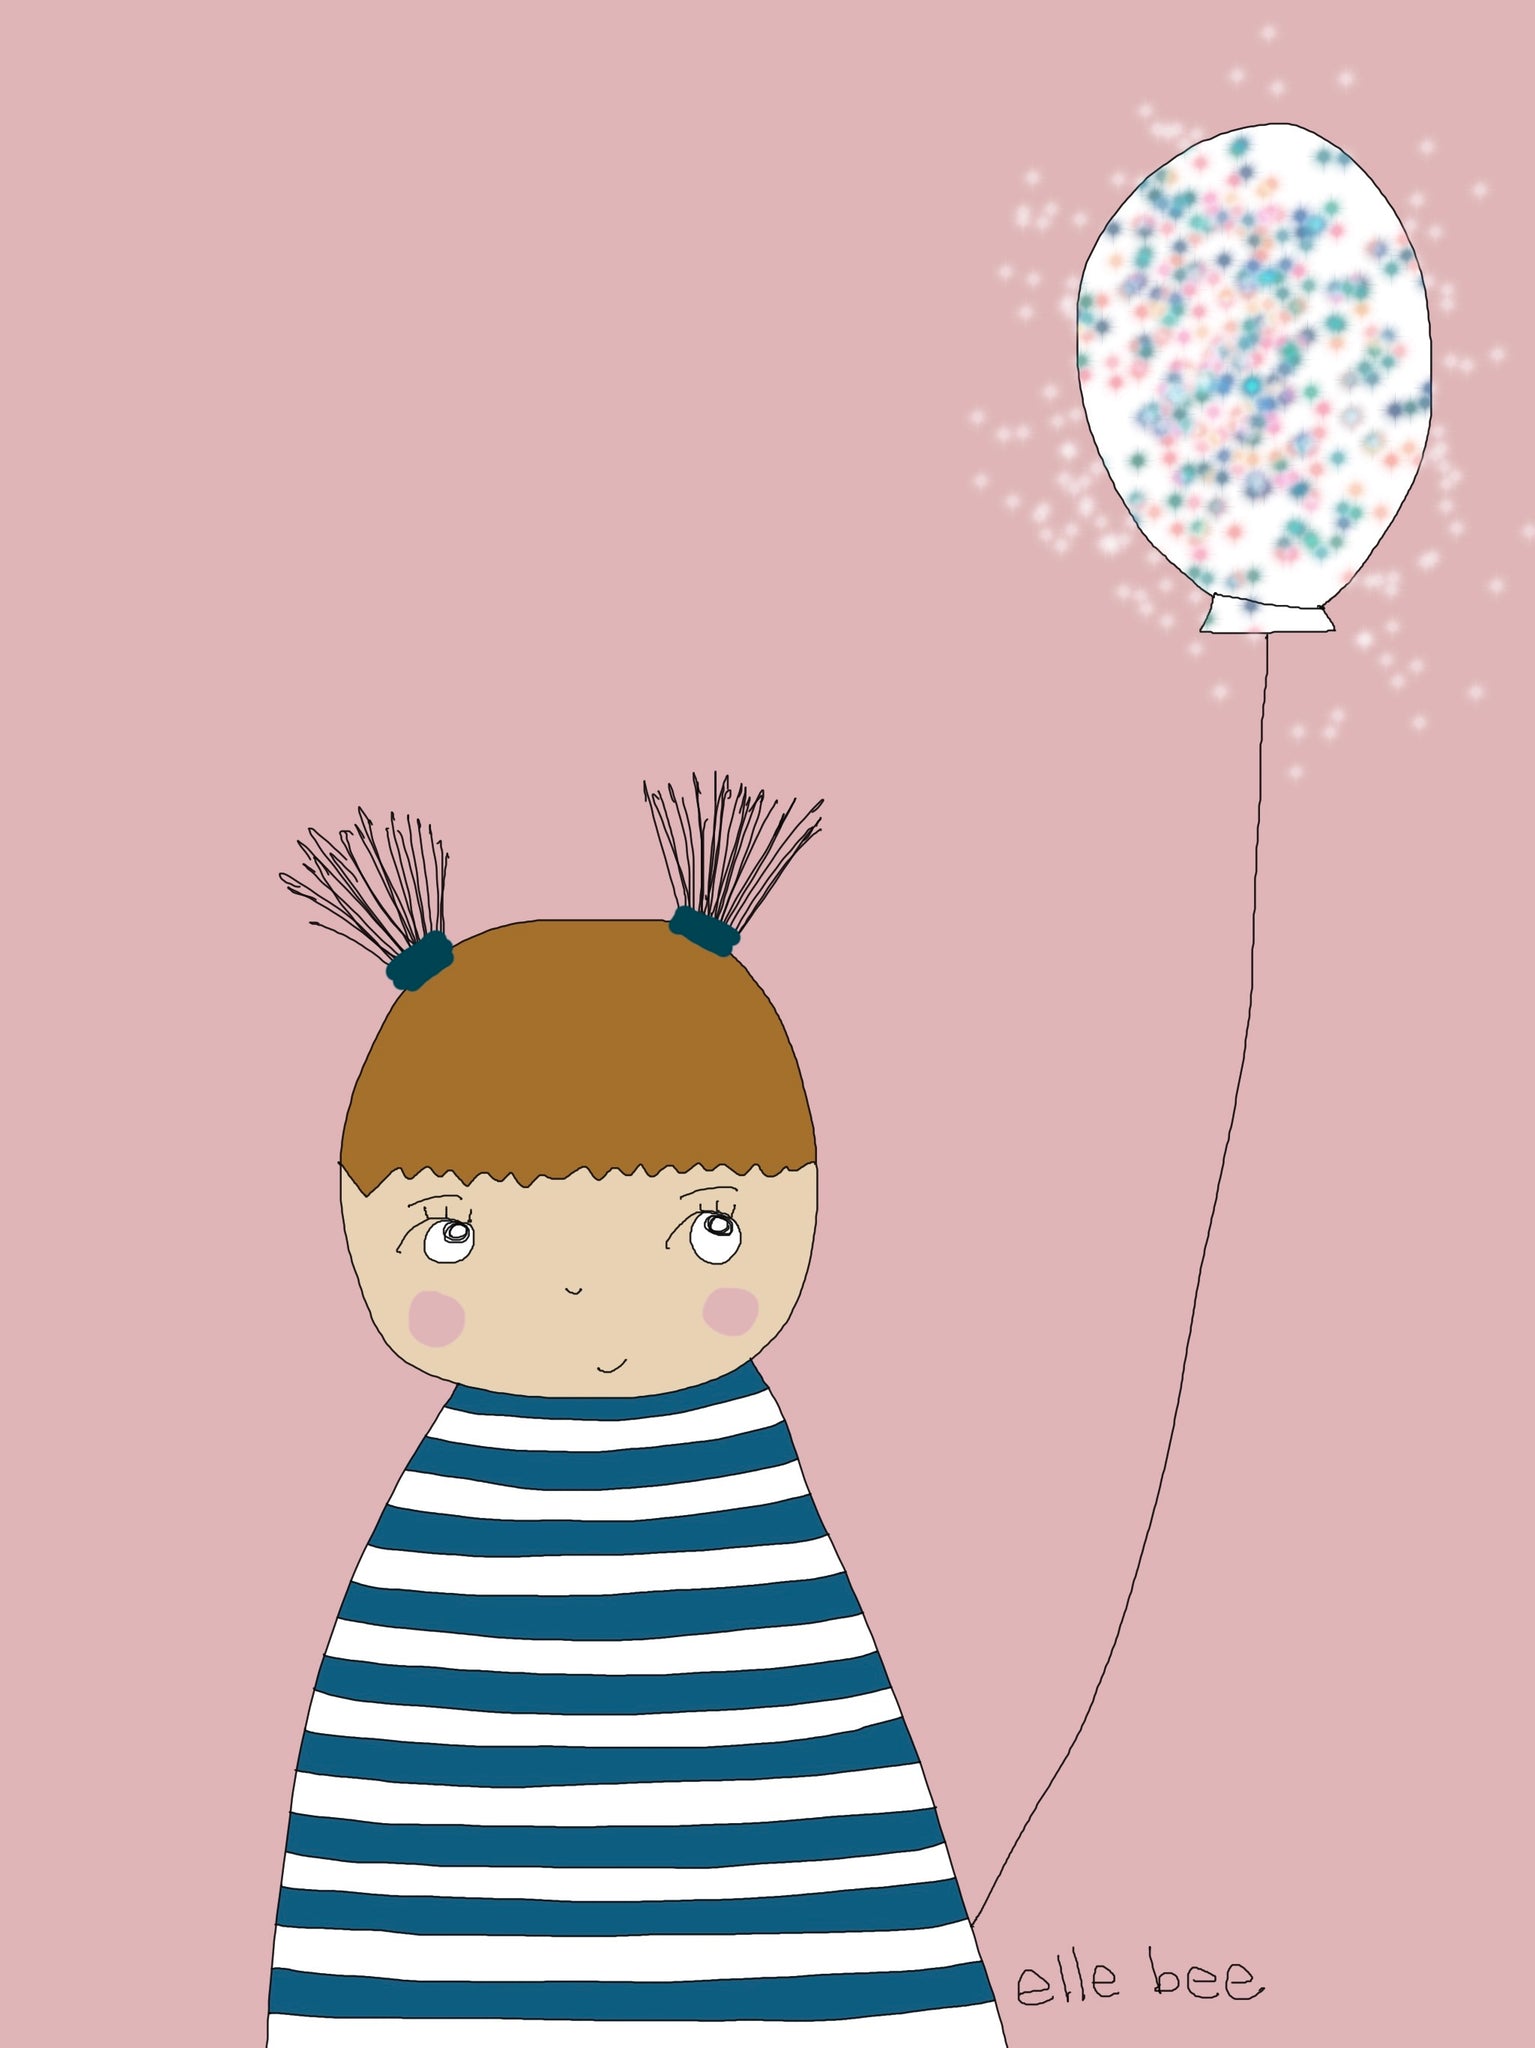 “Sparkly Balloon” greeting card